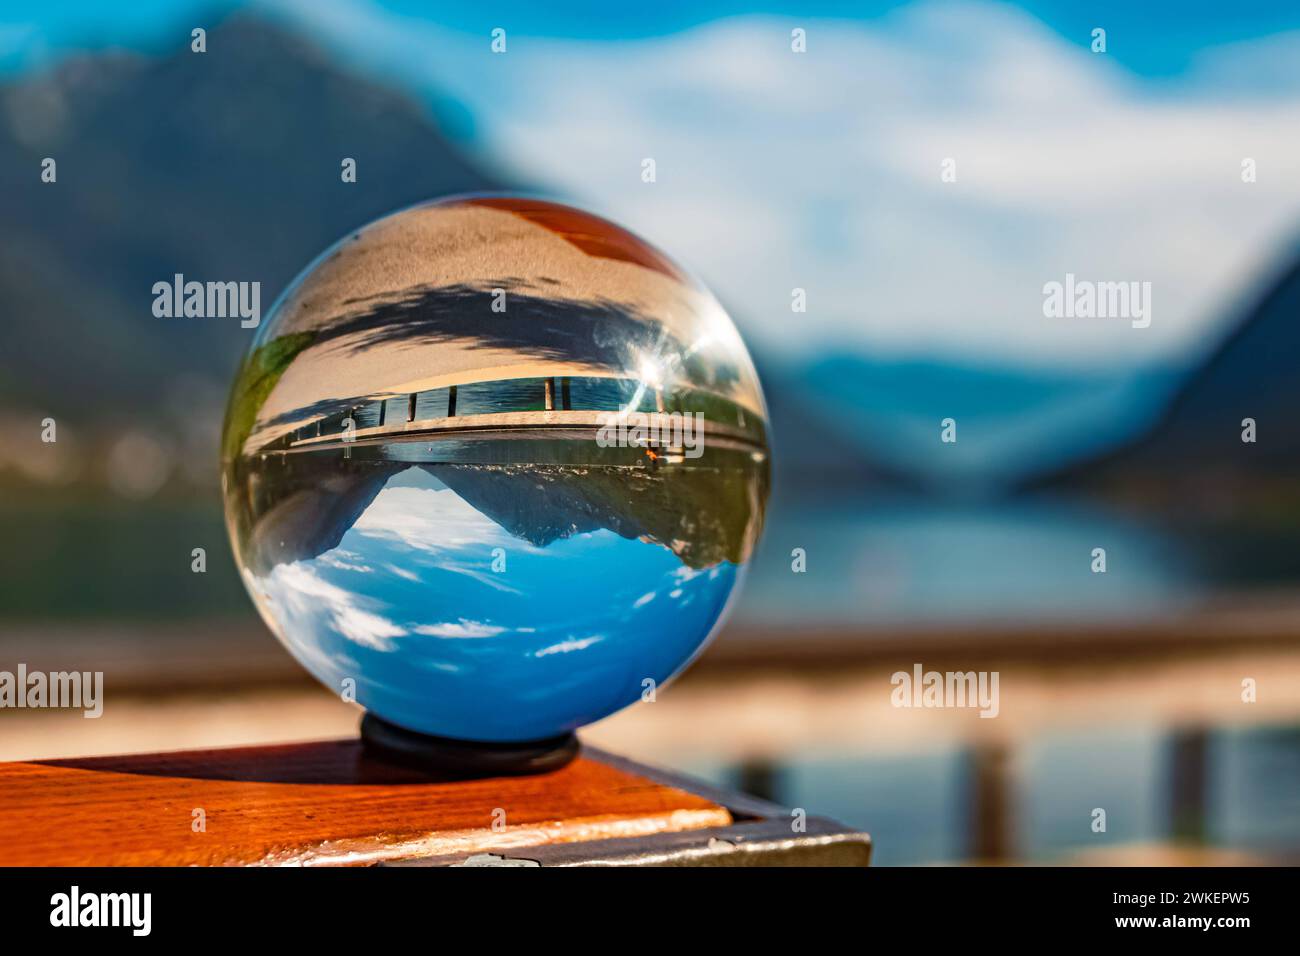 Crystal ball alpine autumn or indian summer landscape shot with boats and reflections at Lake Achensee, Pertisau, Eben am Achensee, Tyrol, Austria Ach Stock Photo